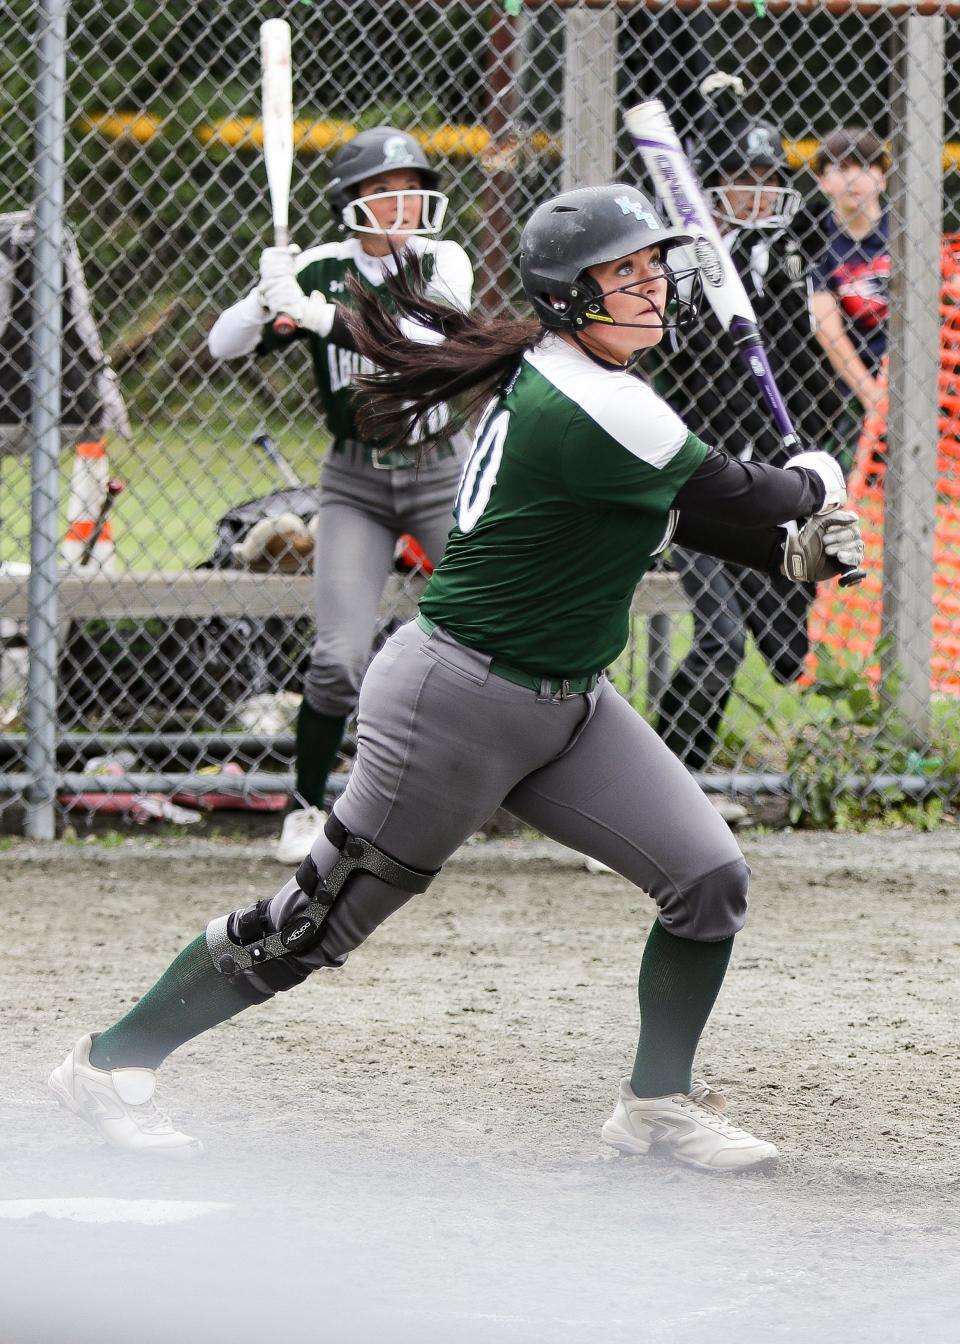 Abington's Kasie Bailey swings during a game against Whittier RVT in the Div. 4 tournament on Sunday, June 4, 2023.